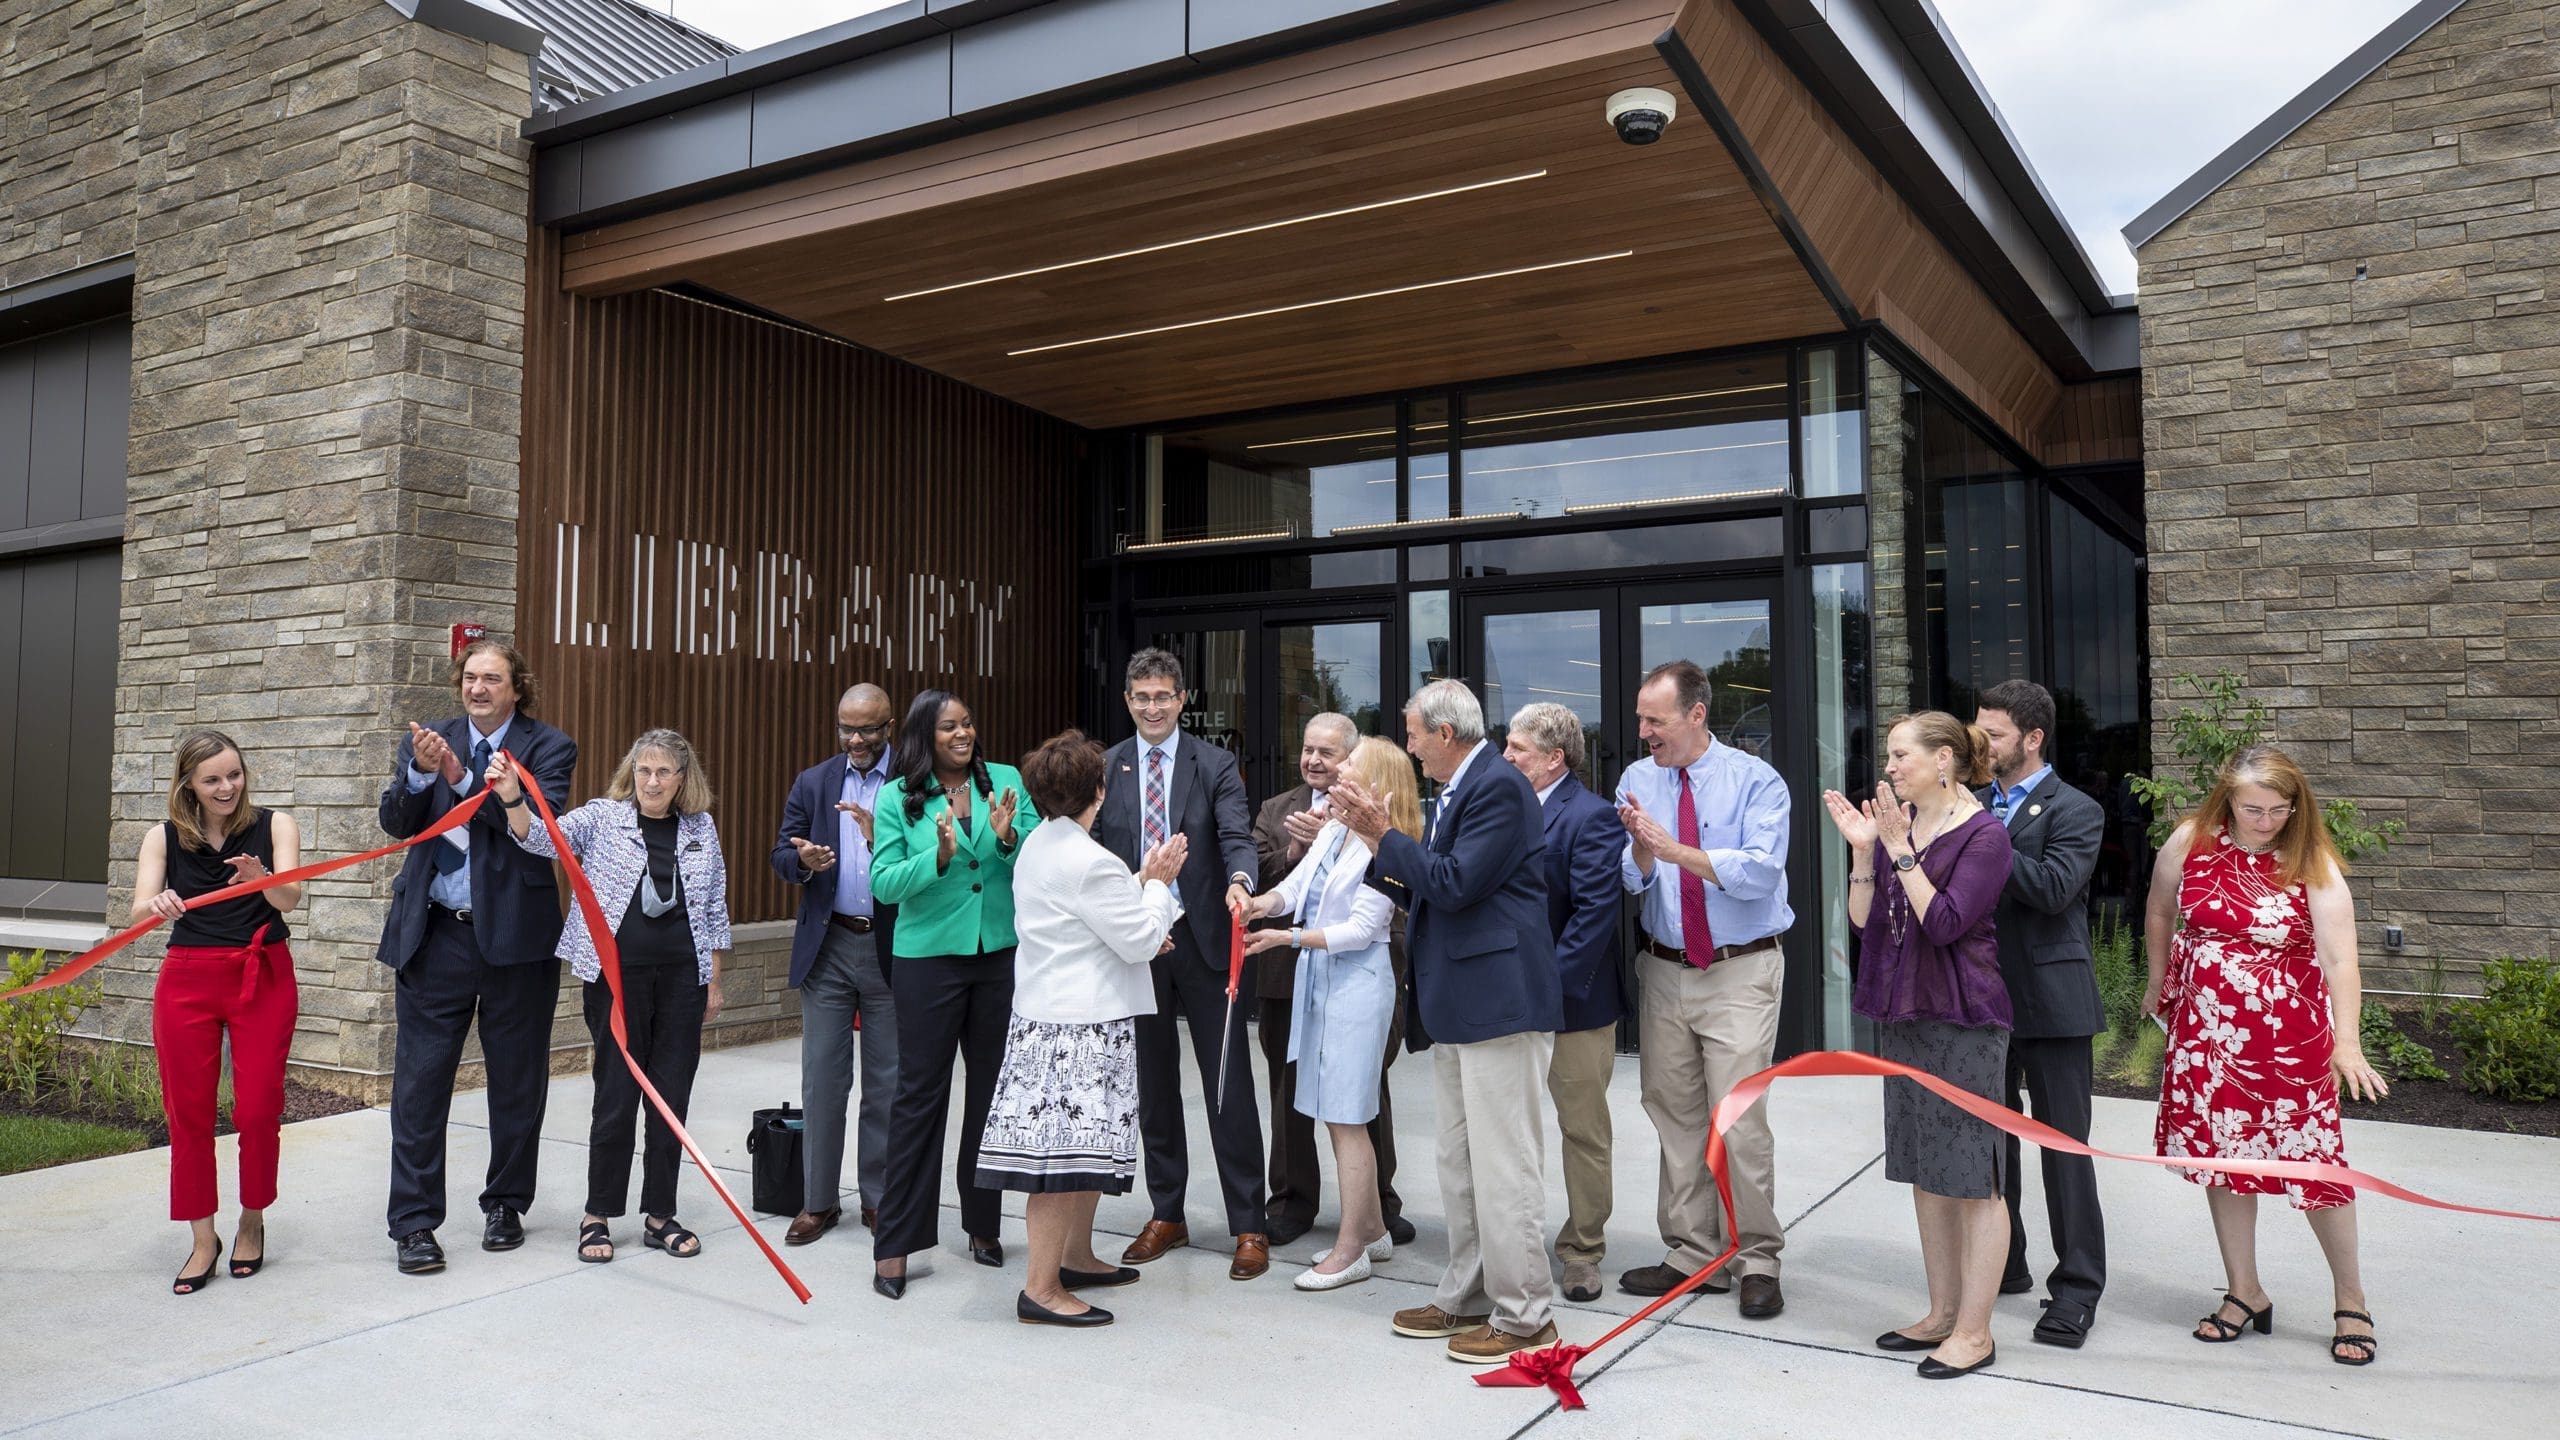 Featured image for “Appoquinimink Library opens with focus on green energy”